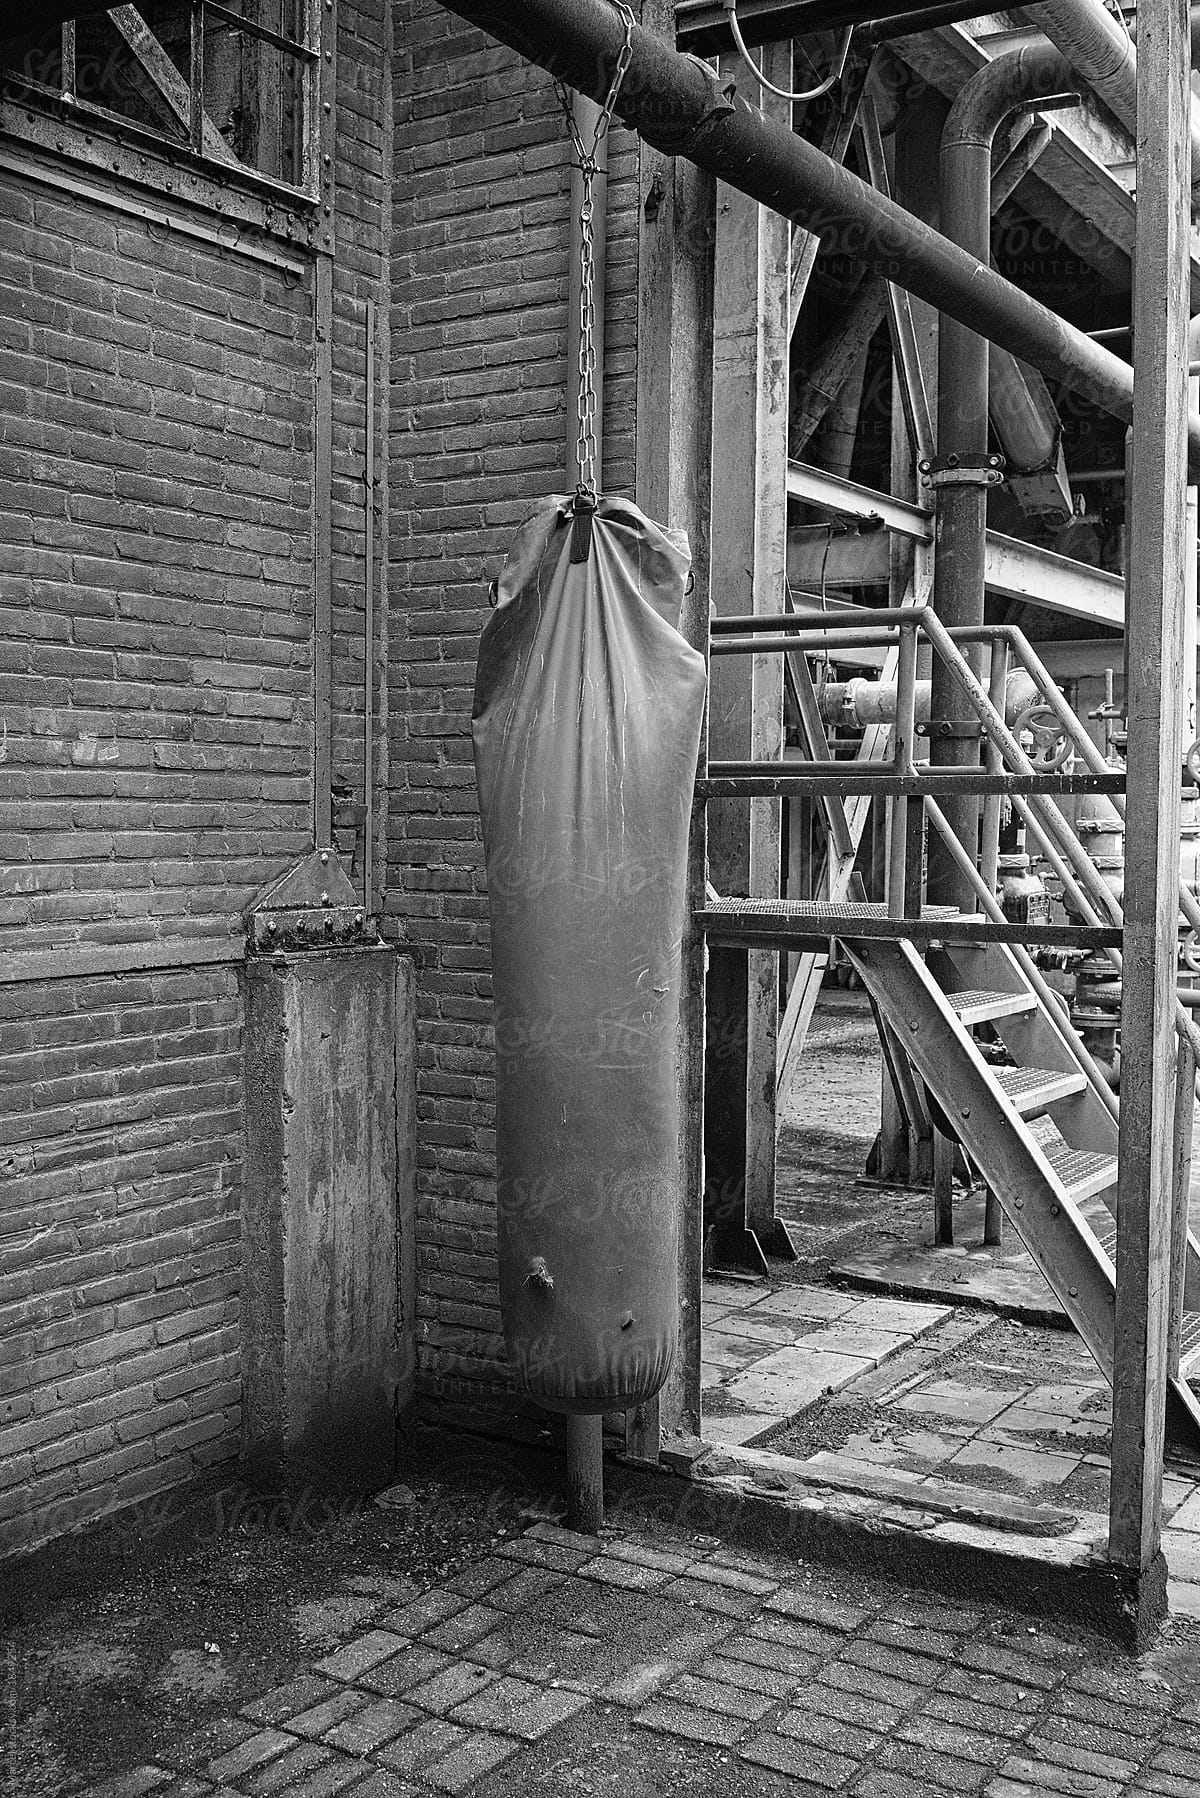 Punching bag in a deserted factory